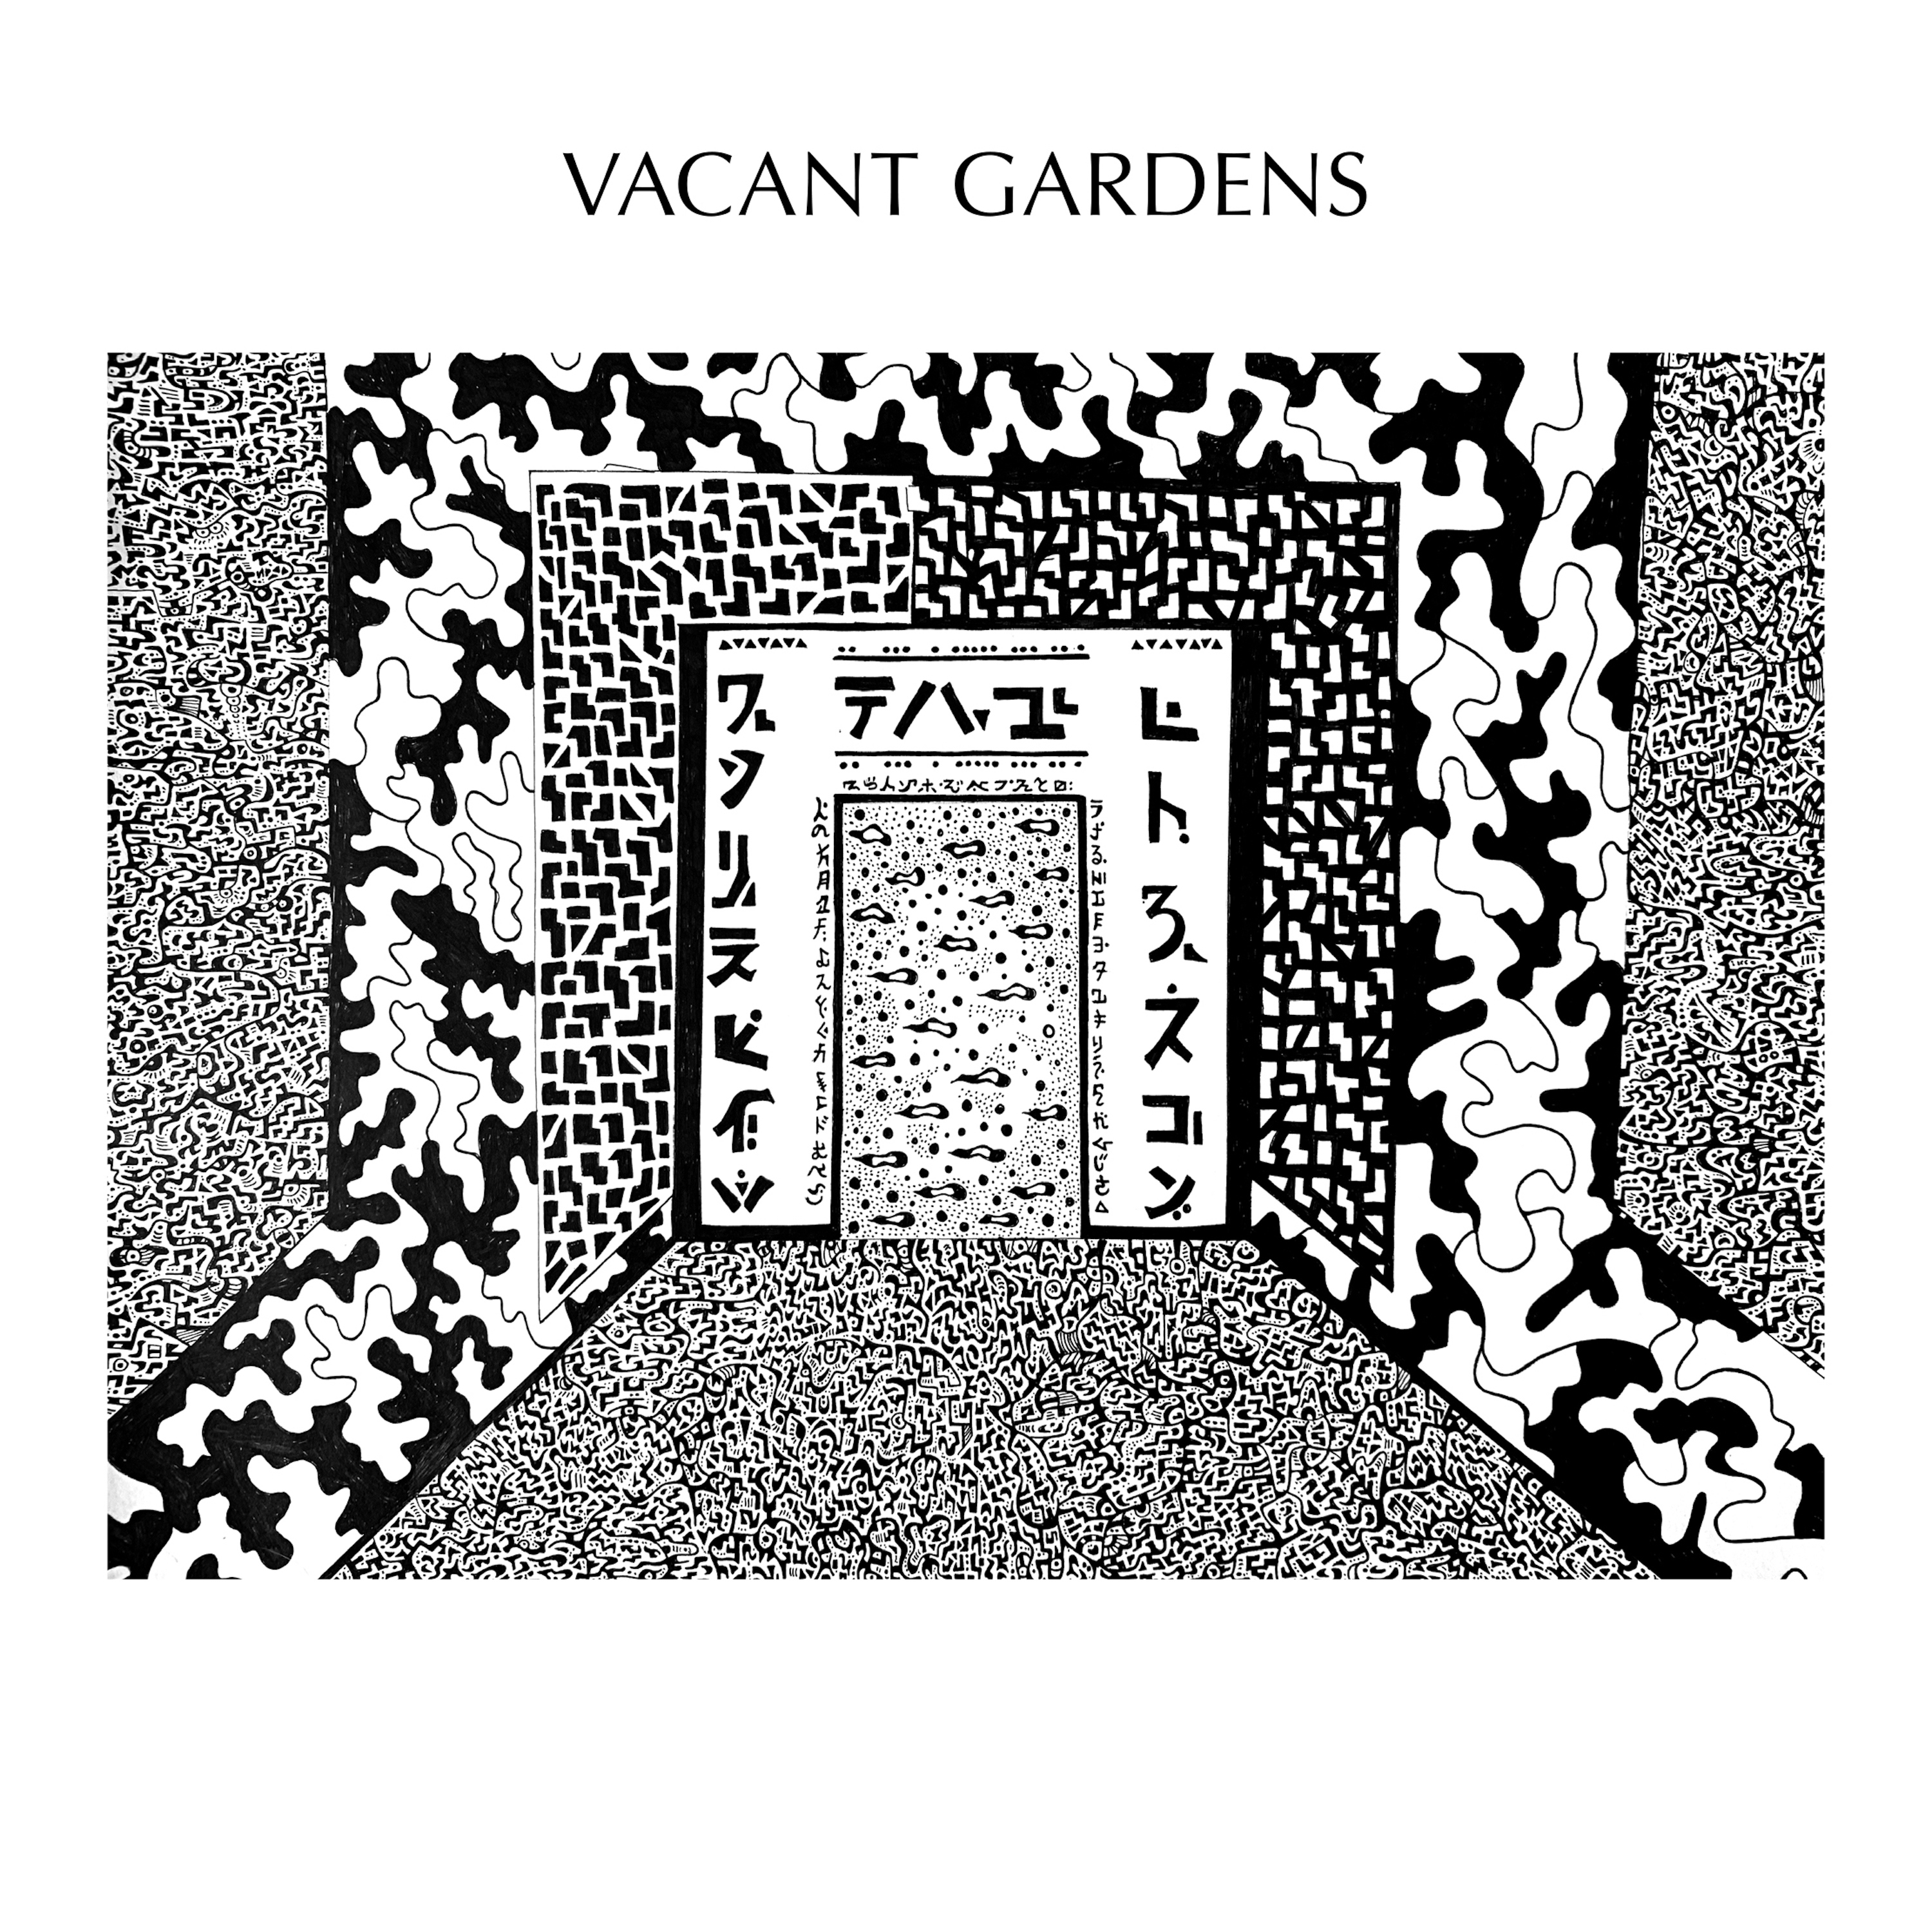 Album artwork for Album artwork for Field of Vines / He Moves Through by Vacant Gardens by Field of Vines / He Moves Through - Vacant Gardens